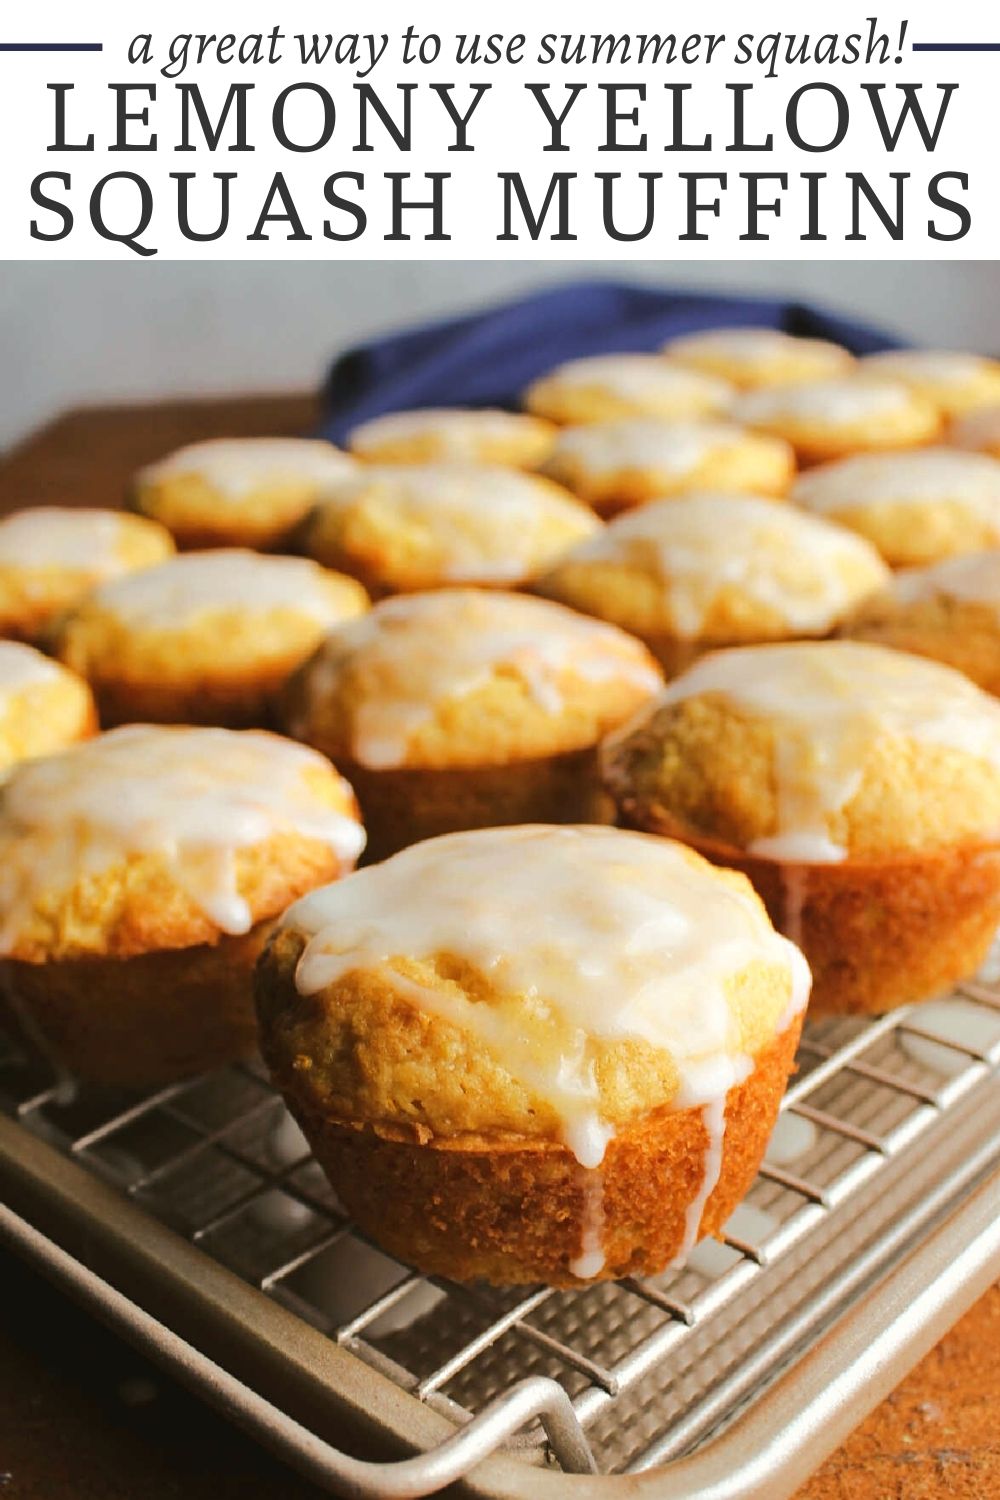 These summery muffins are loaded with yellow squash and lemon goodness. They are a perfect way to turn some of summer's bounty into a delicious breakfast.